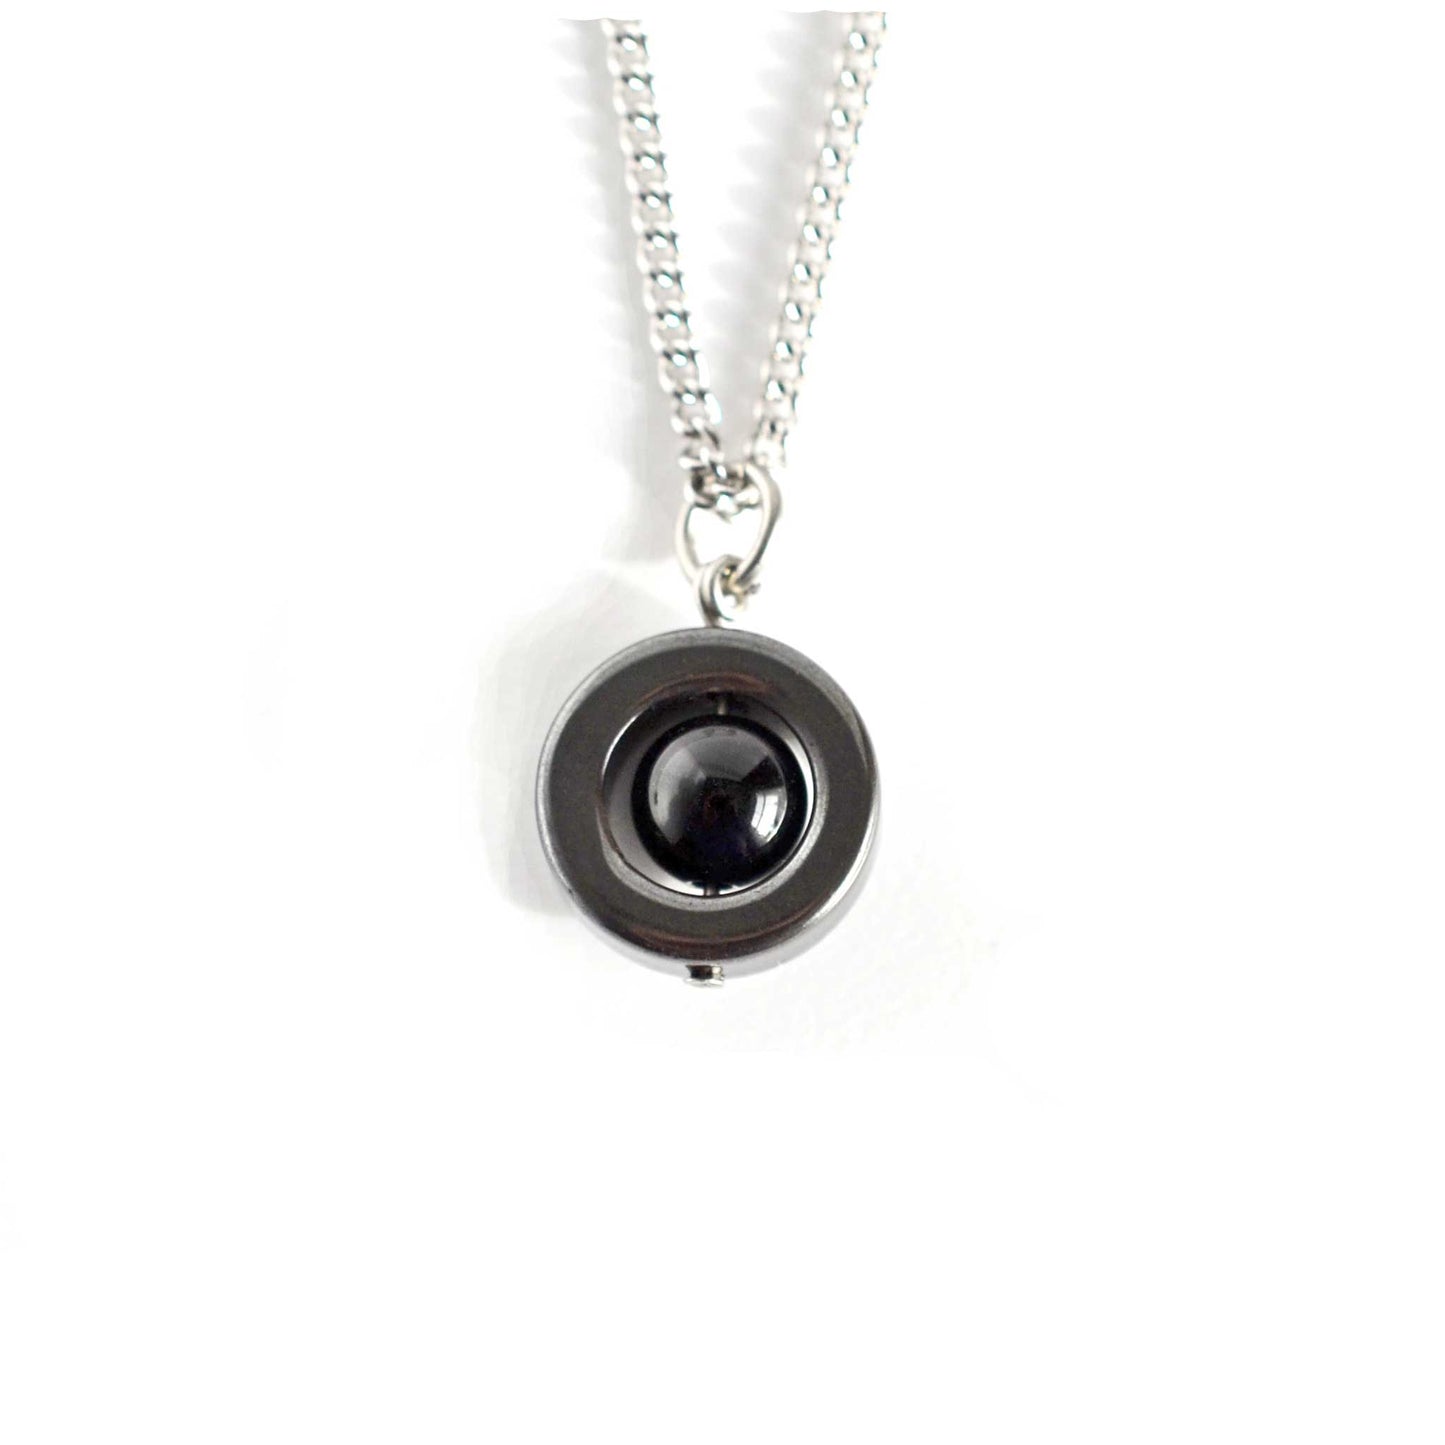 Hematite and black Onyx spinner necklace on white background.